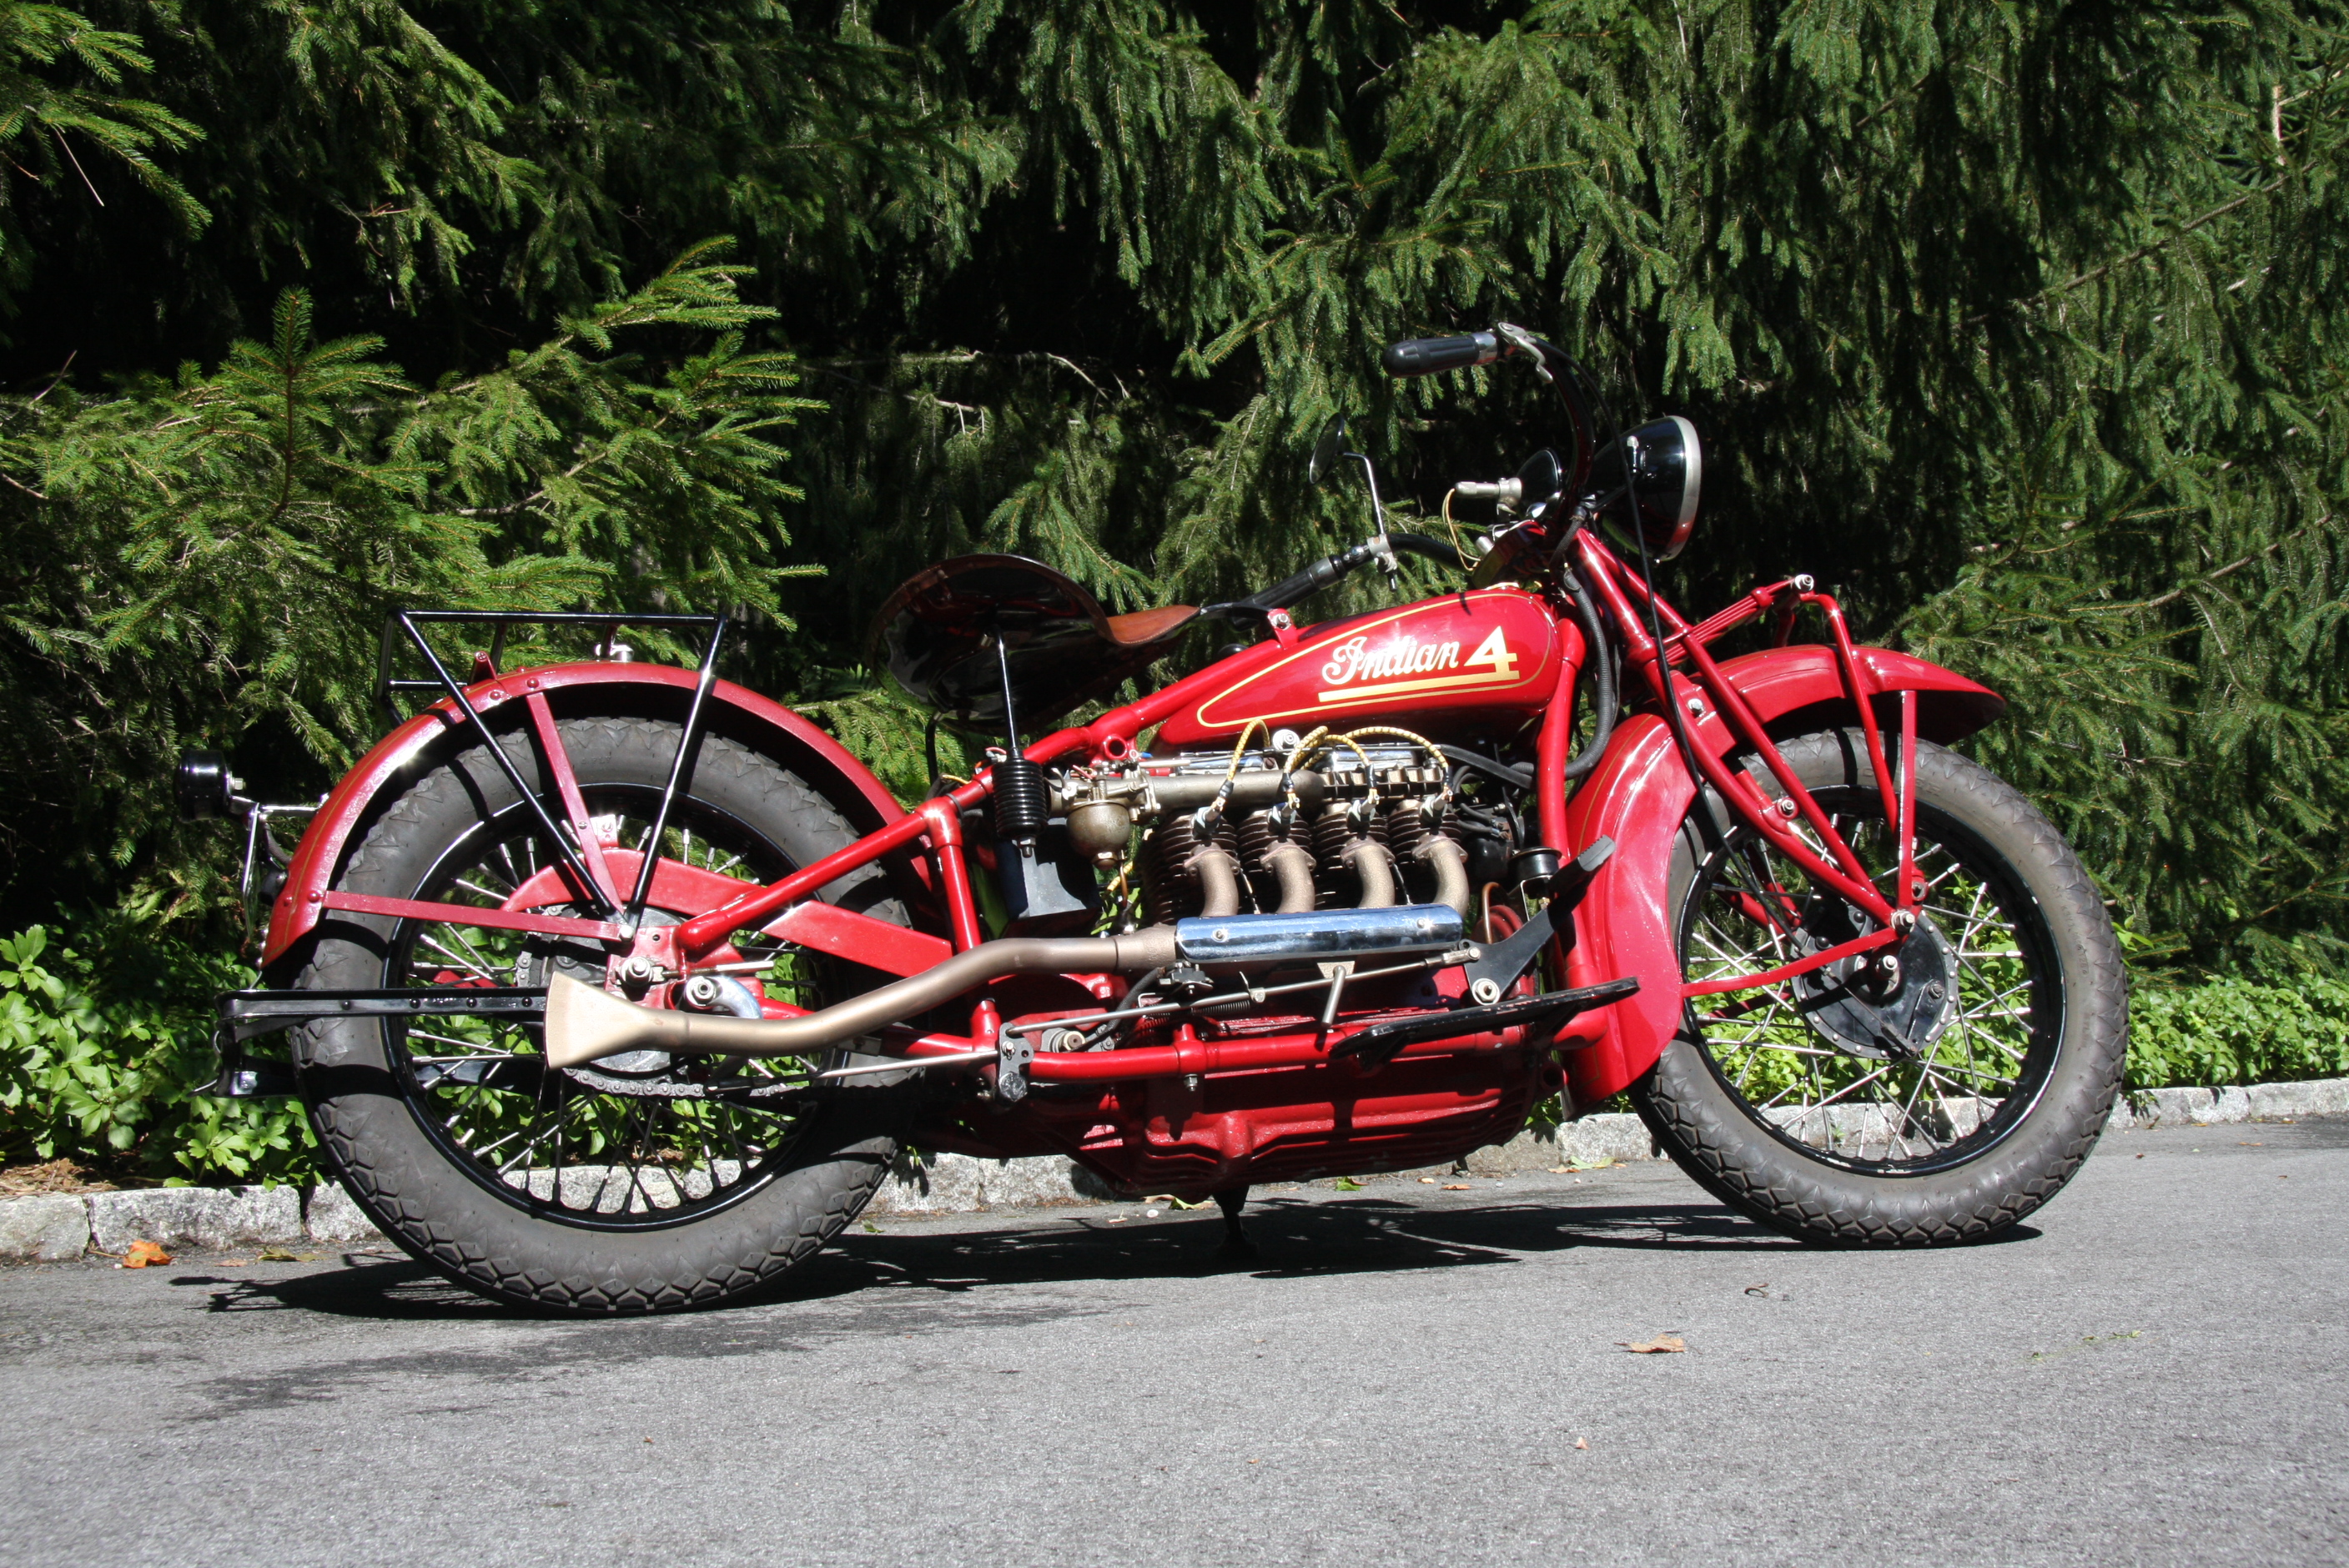 Classic Motorcycle valuations - DCI Solution